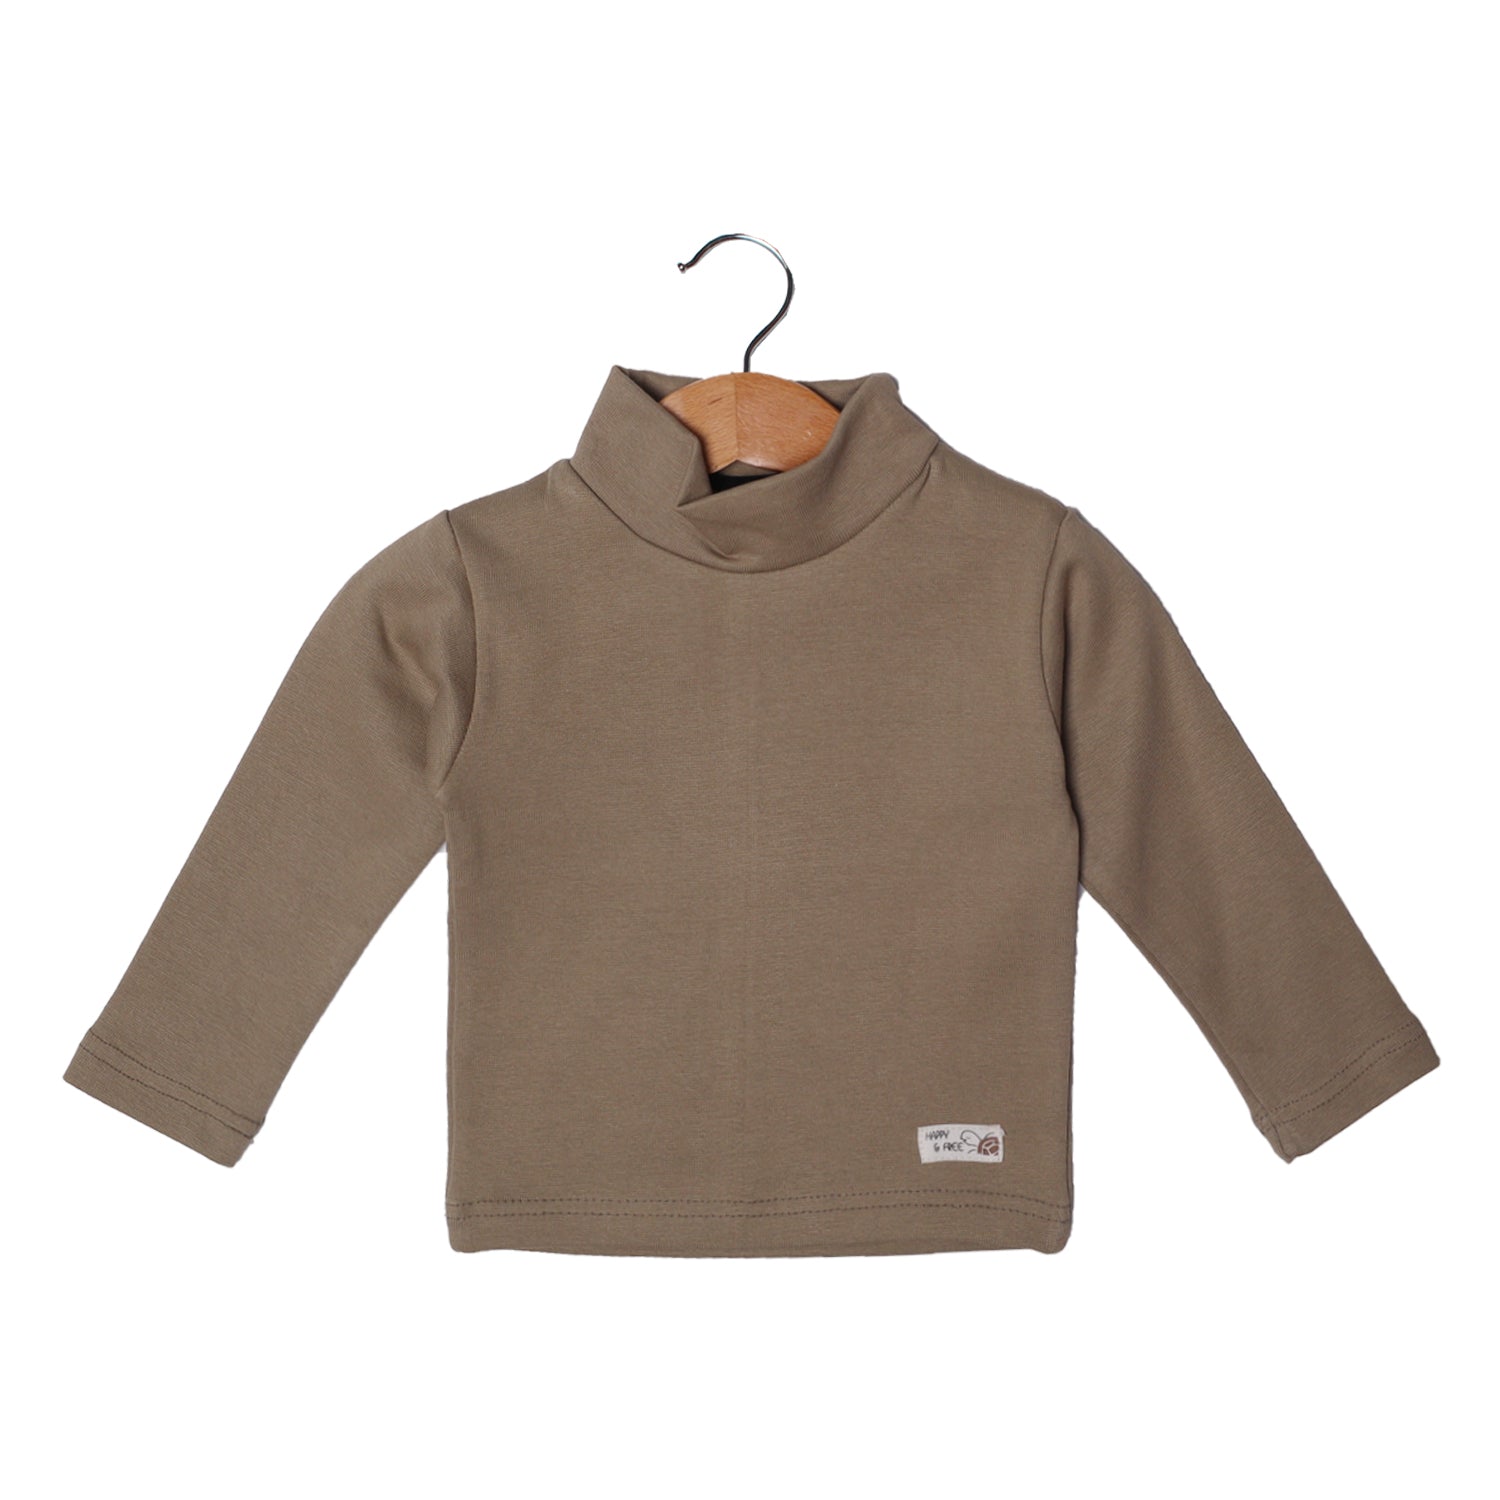 OLIVE GREEN PLAIN HIGH NECK FULL SLEEVES FOR WINTERS